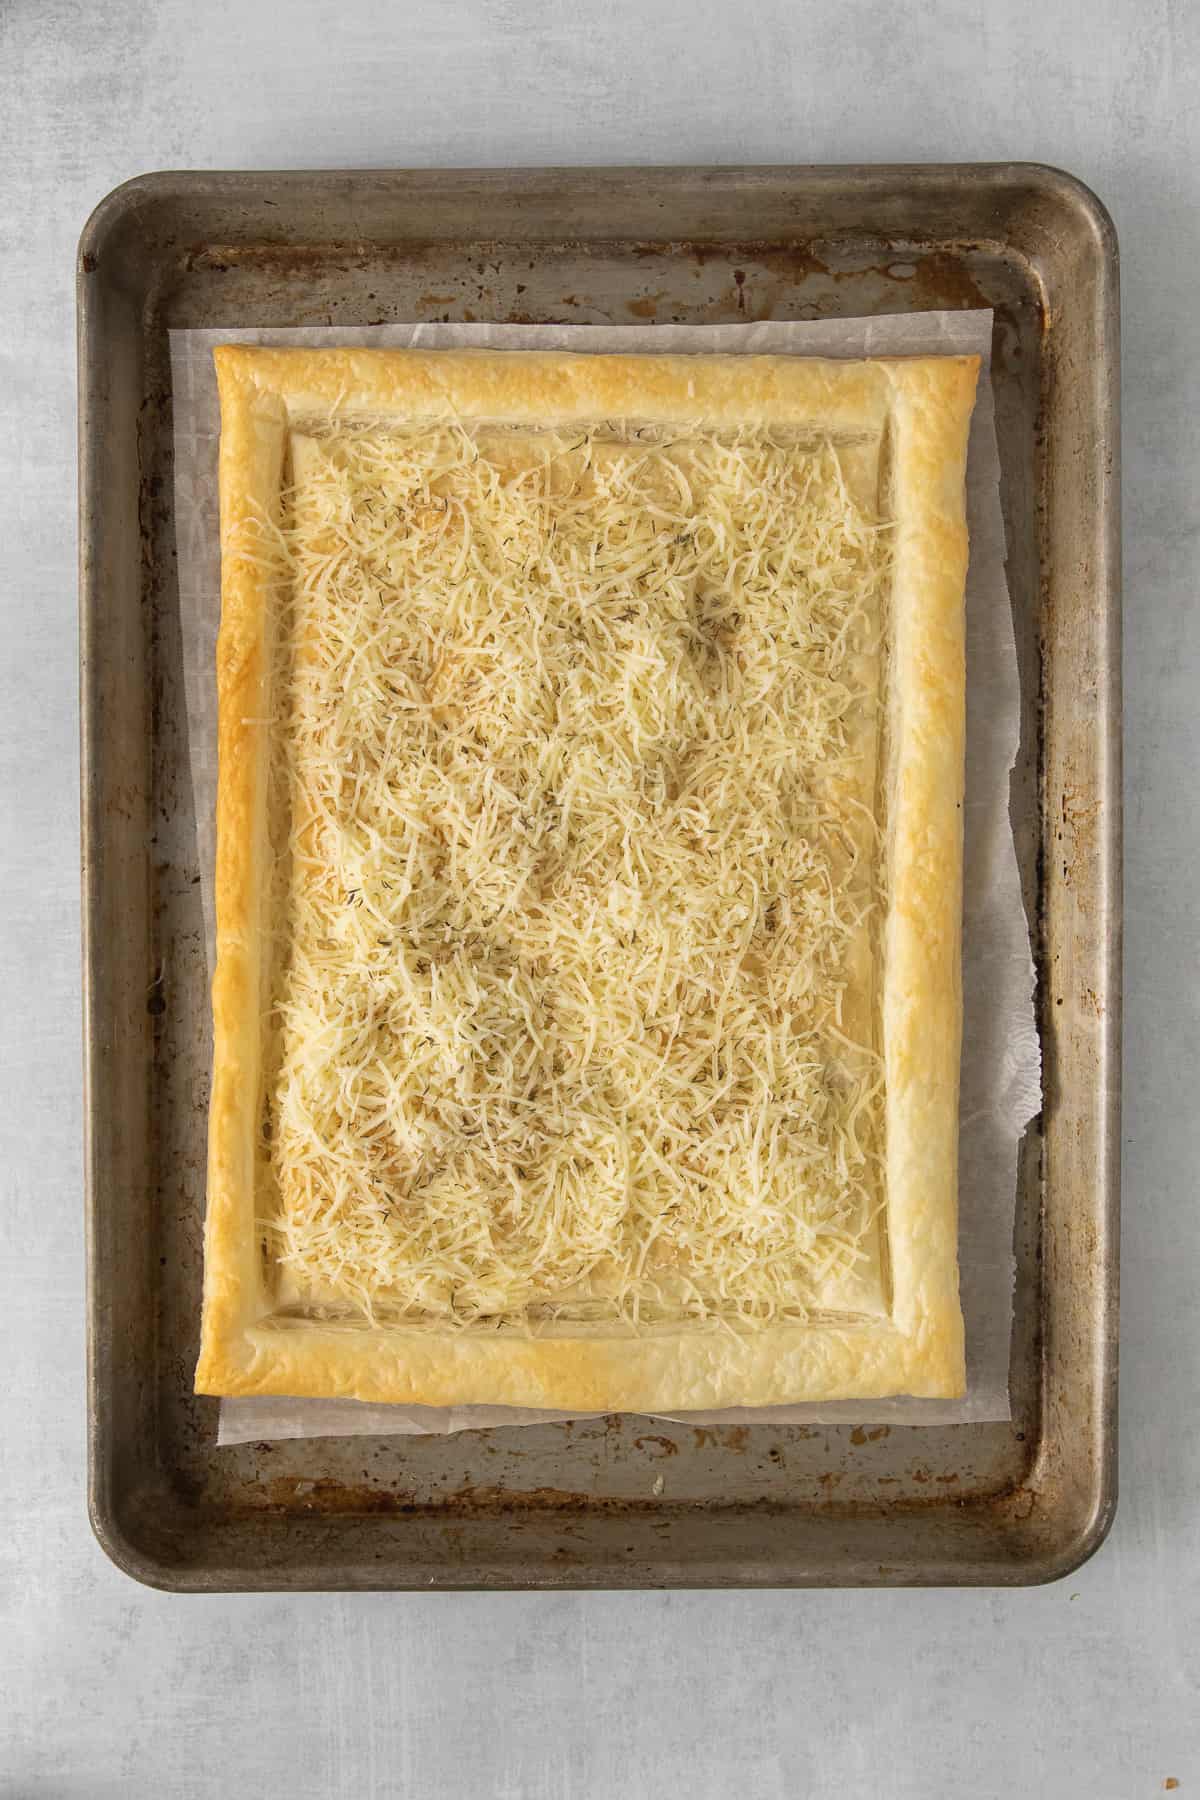 Puff pastry topped with shredded gruyere on a baking sheet.